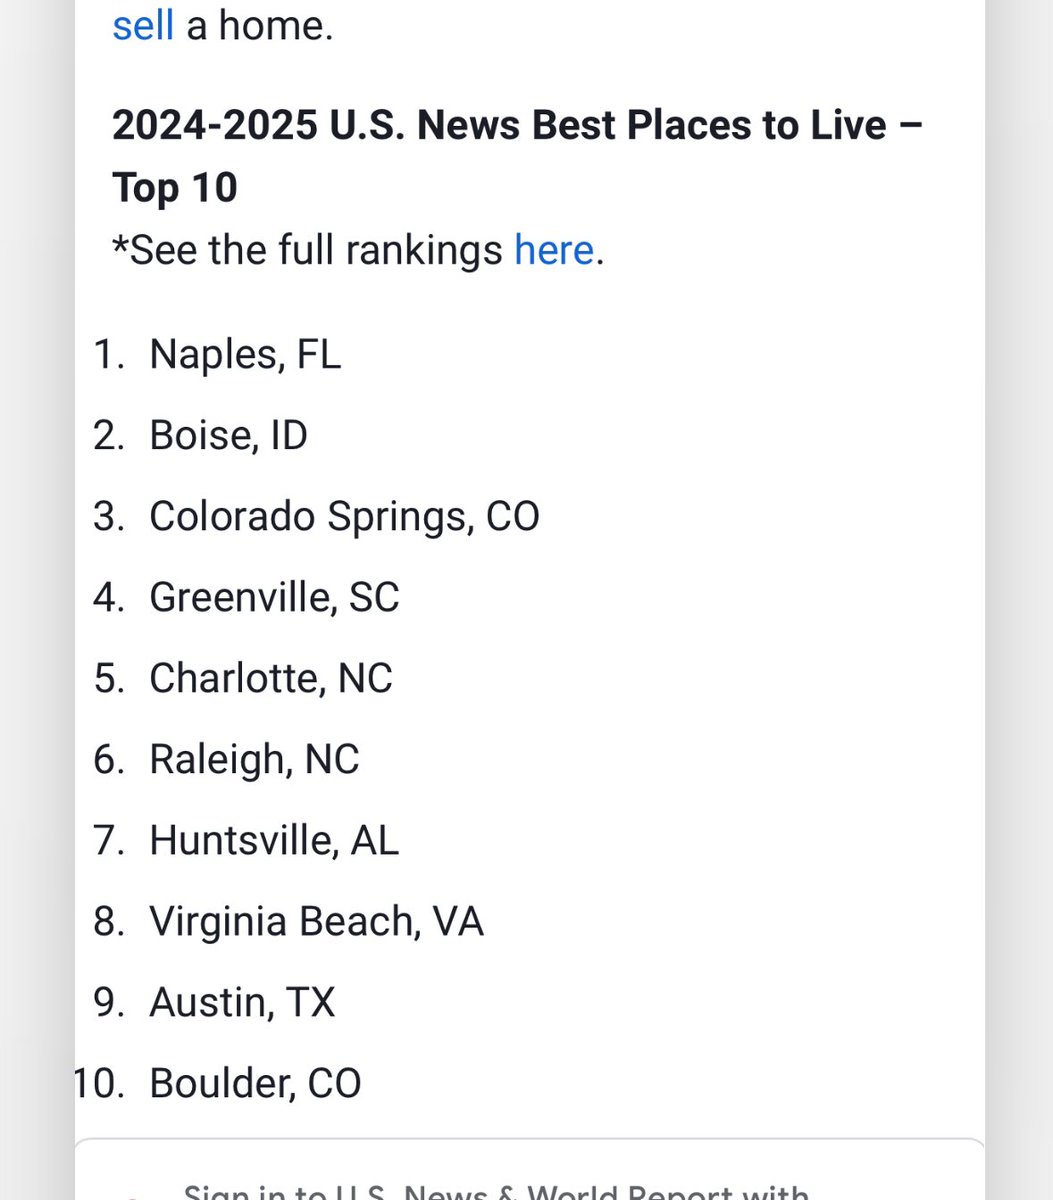 Austin, TX lands back in the Top 10 (No 9) in @USNewsand_World ranking of Best Places To Live after dropping to No. 40 in 2023. I think if we didn’t face all of these affordability issues here we’d be a hard city to knock from No. 1 year after year.